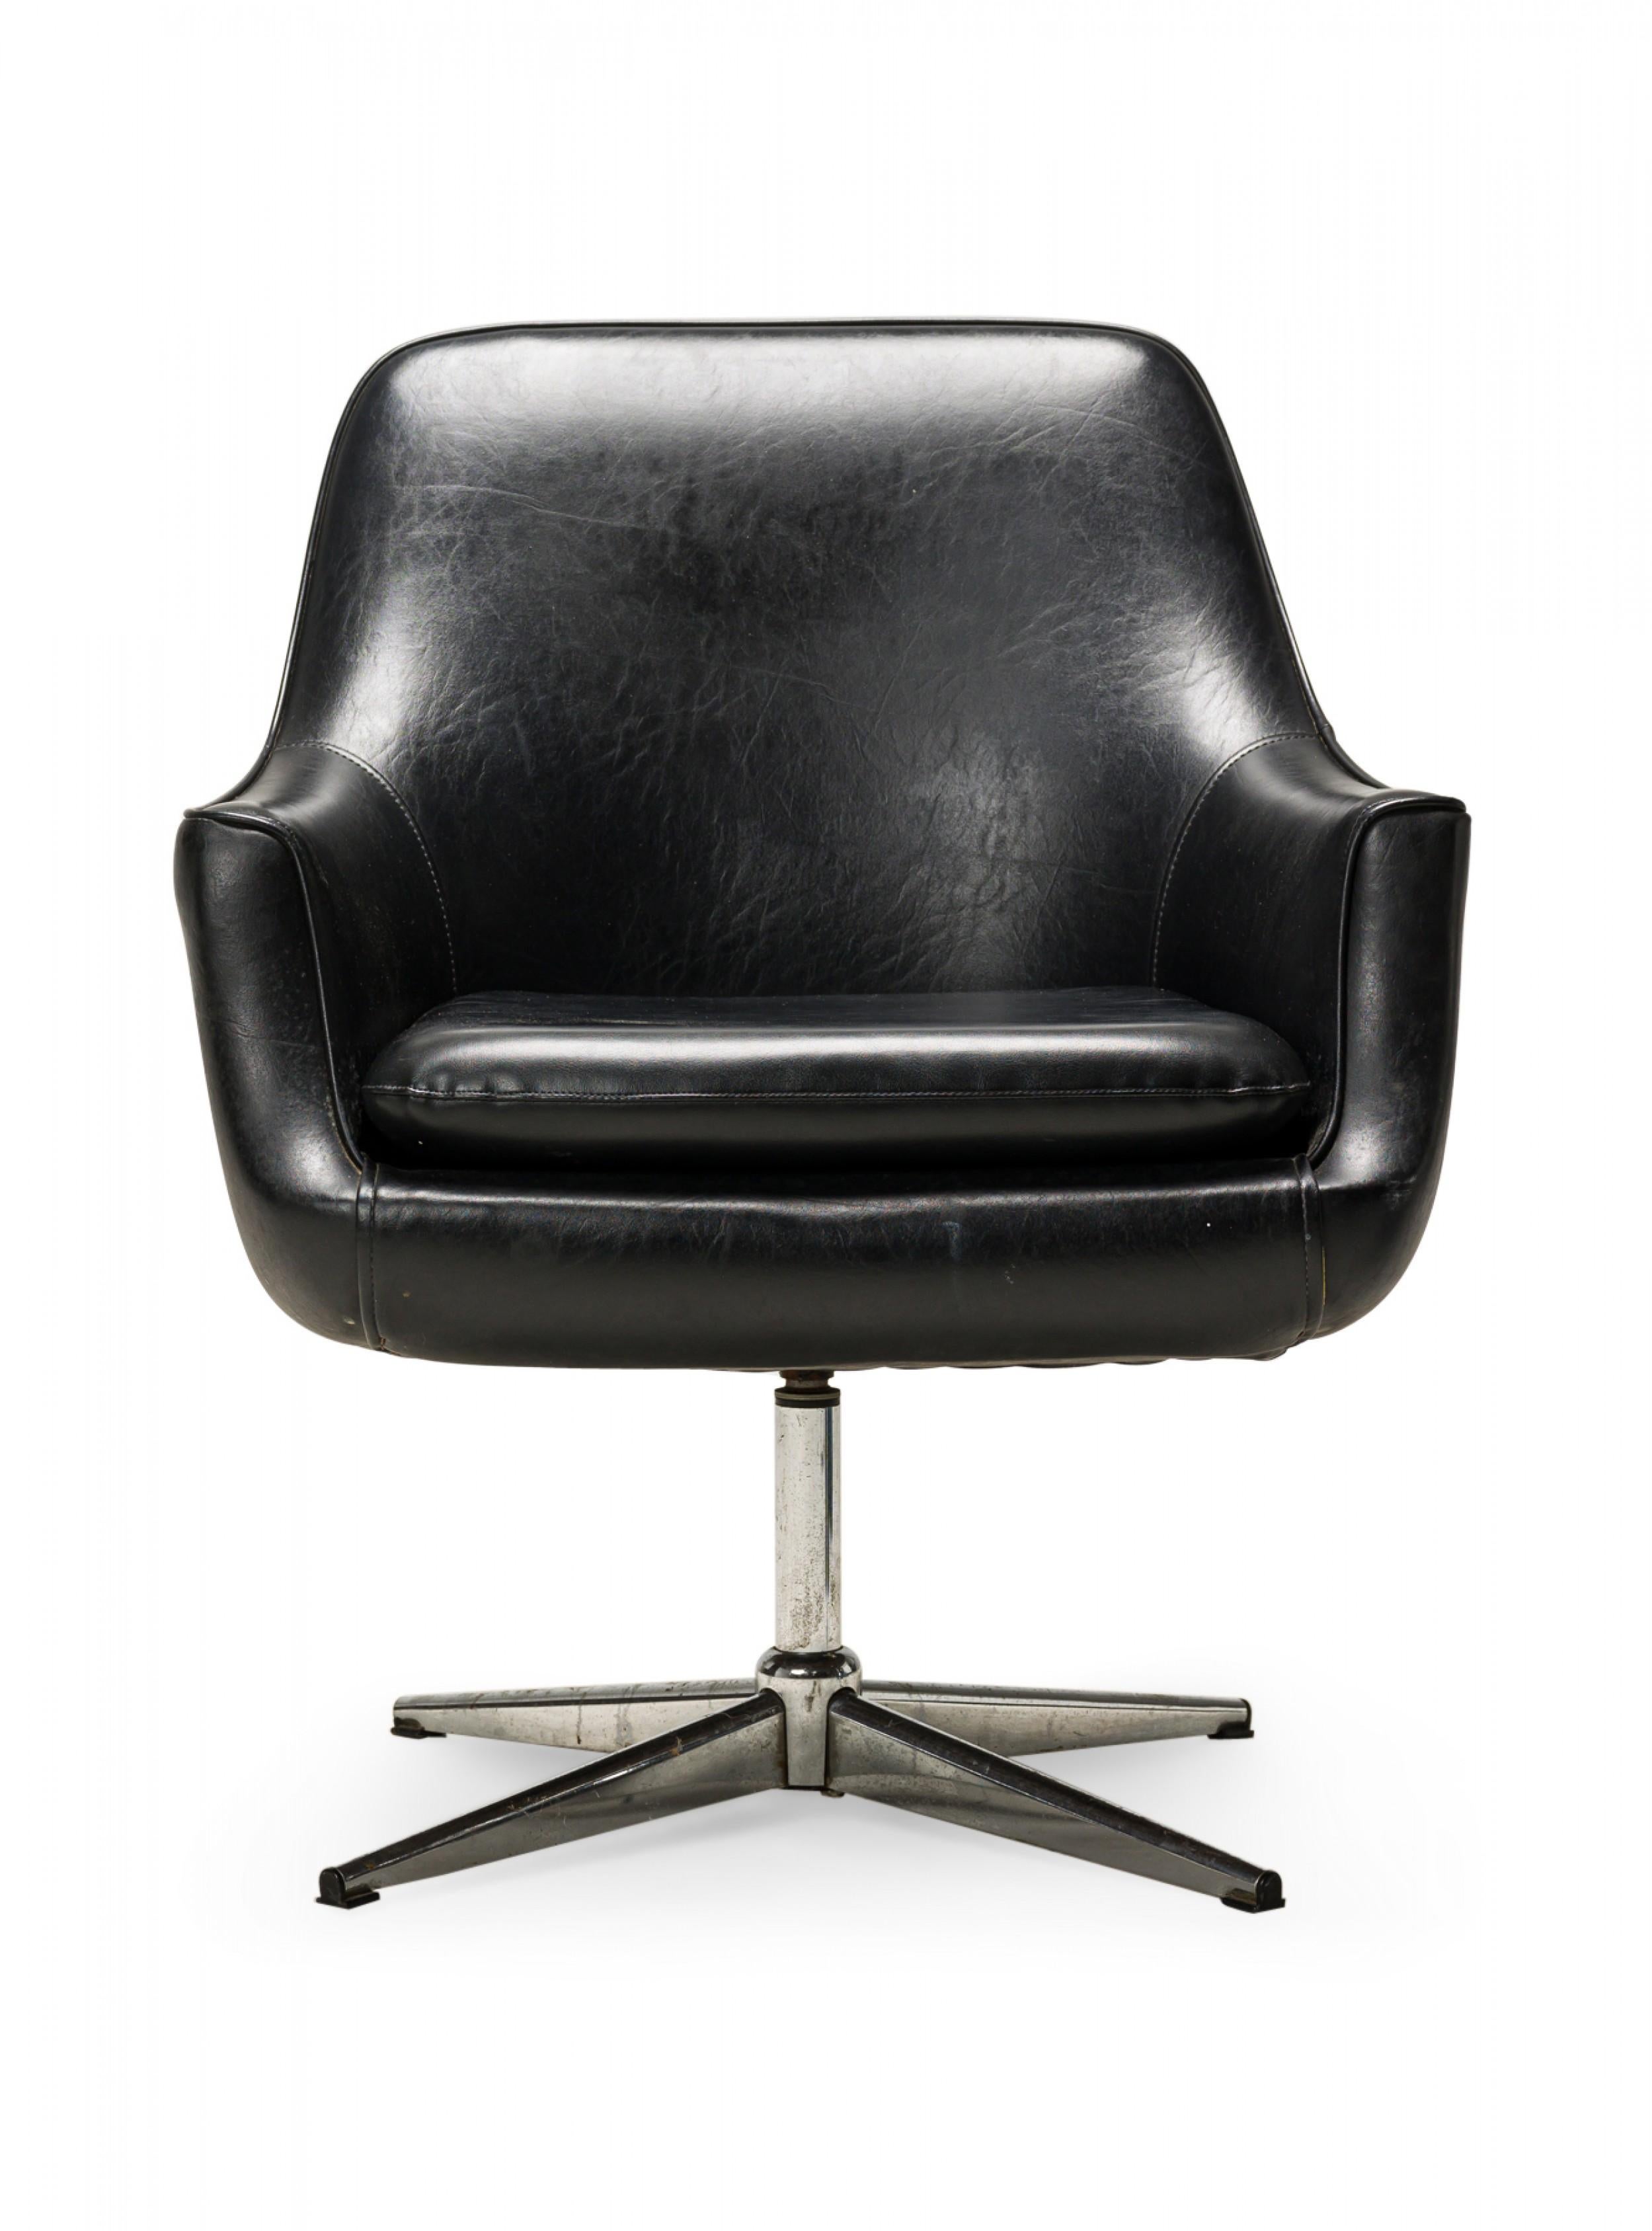 Swedish Mid-Century swivel armchair with black leather upholstery and seat cushion supported on a chrome pedestal base with five legs. (OVERMAN)